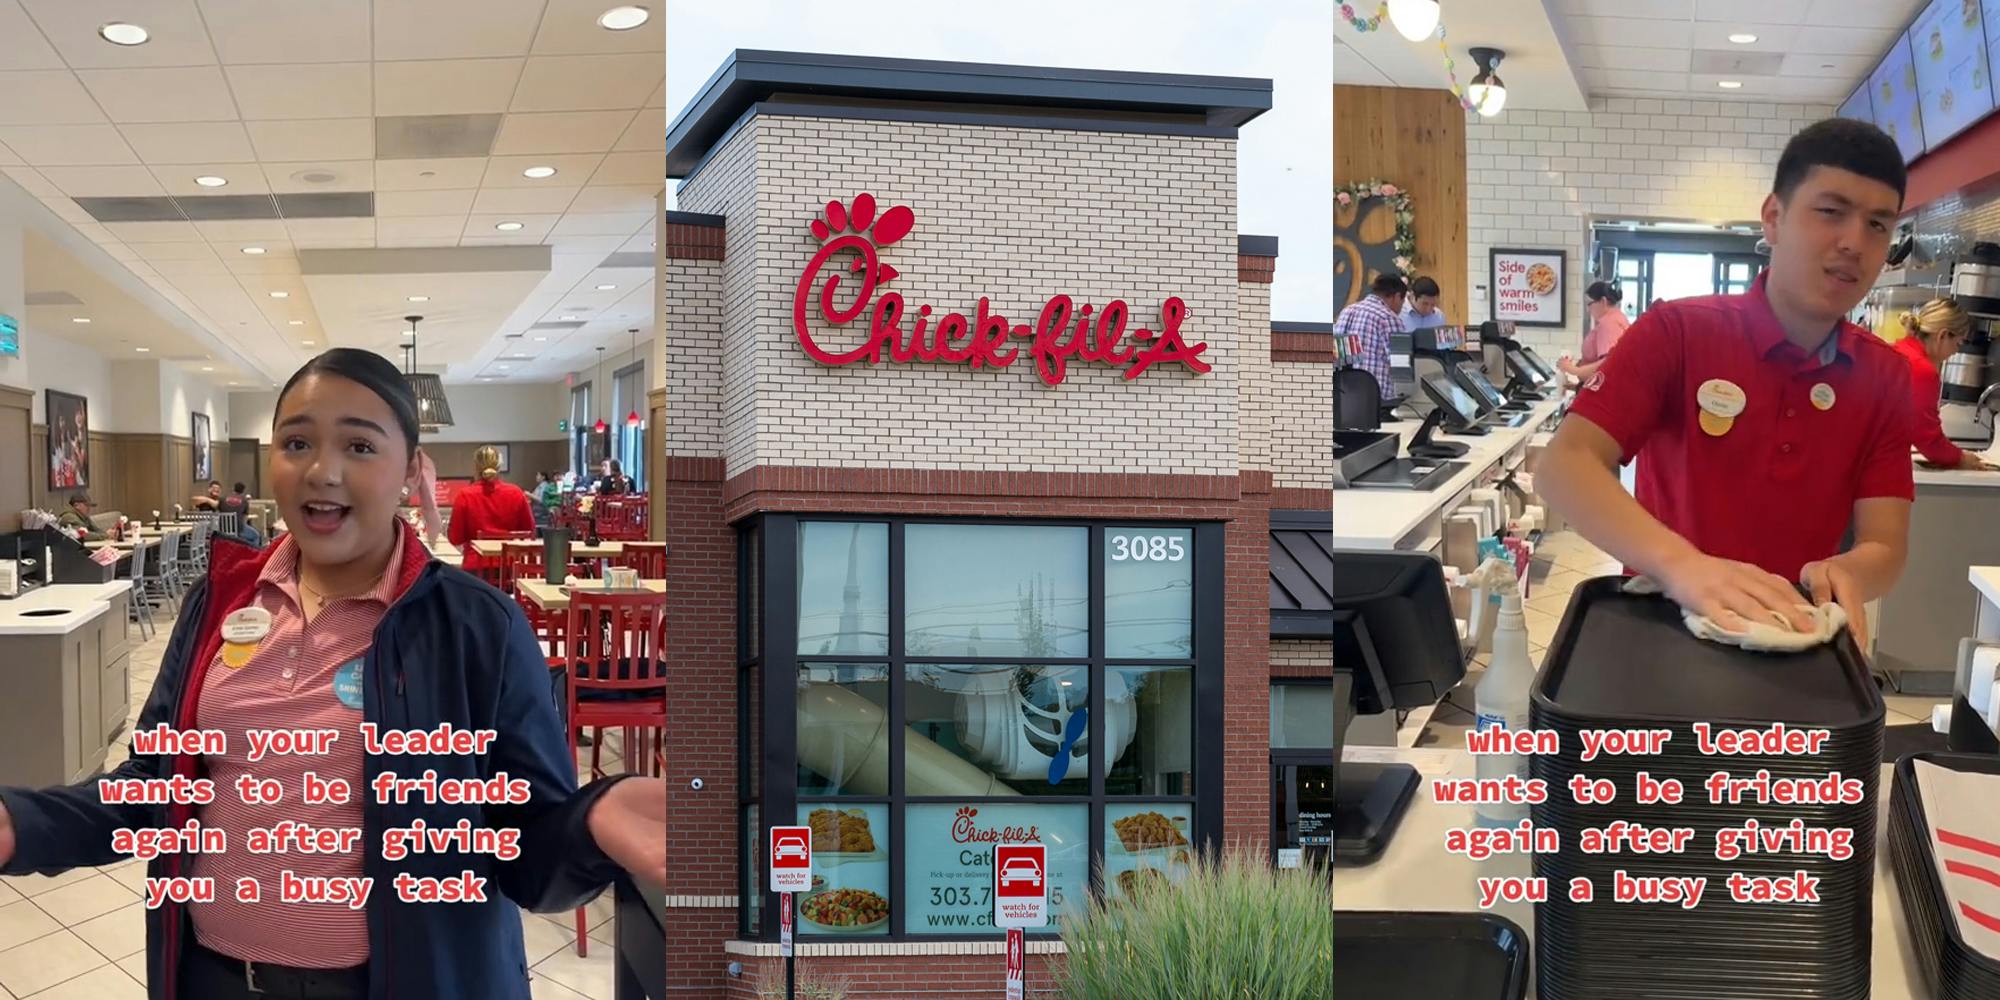 Chick-Fil-A employee with arms out with caption "when your leader wants to be friends again after giving you a busy task" (l) Chick-Fil-A building with sign (c) Chick-Fil-A employee cleaning tray with caption "when your leader wants to be friends again after giving you a busy task" (r)